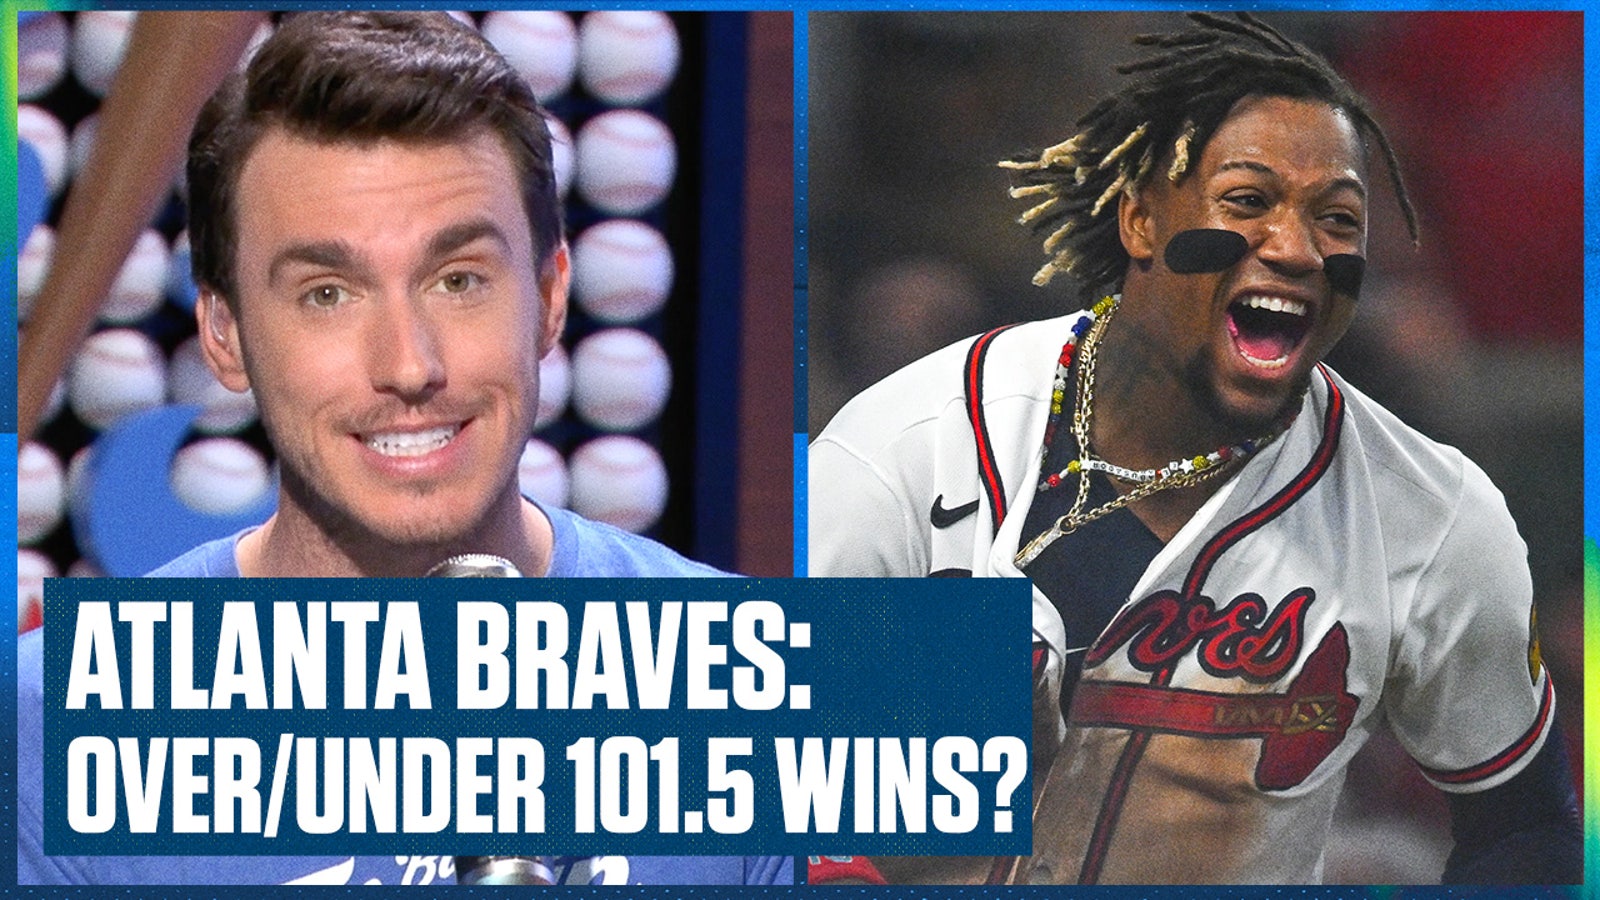 Will the Atlanta Braves win over/under 101.5 games for the 2024 season?